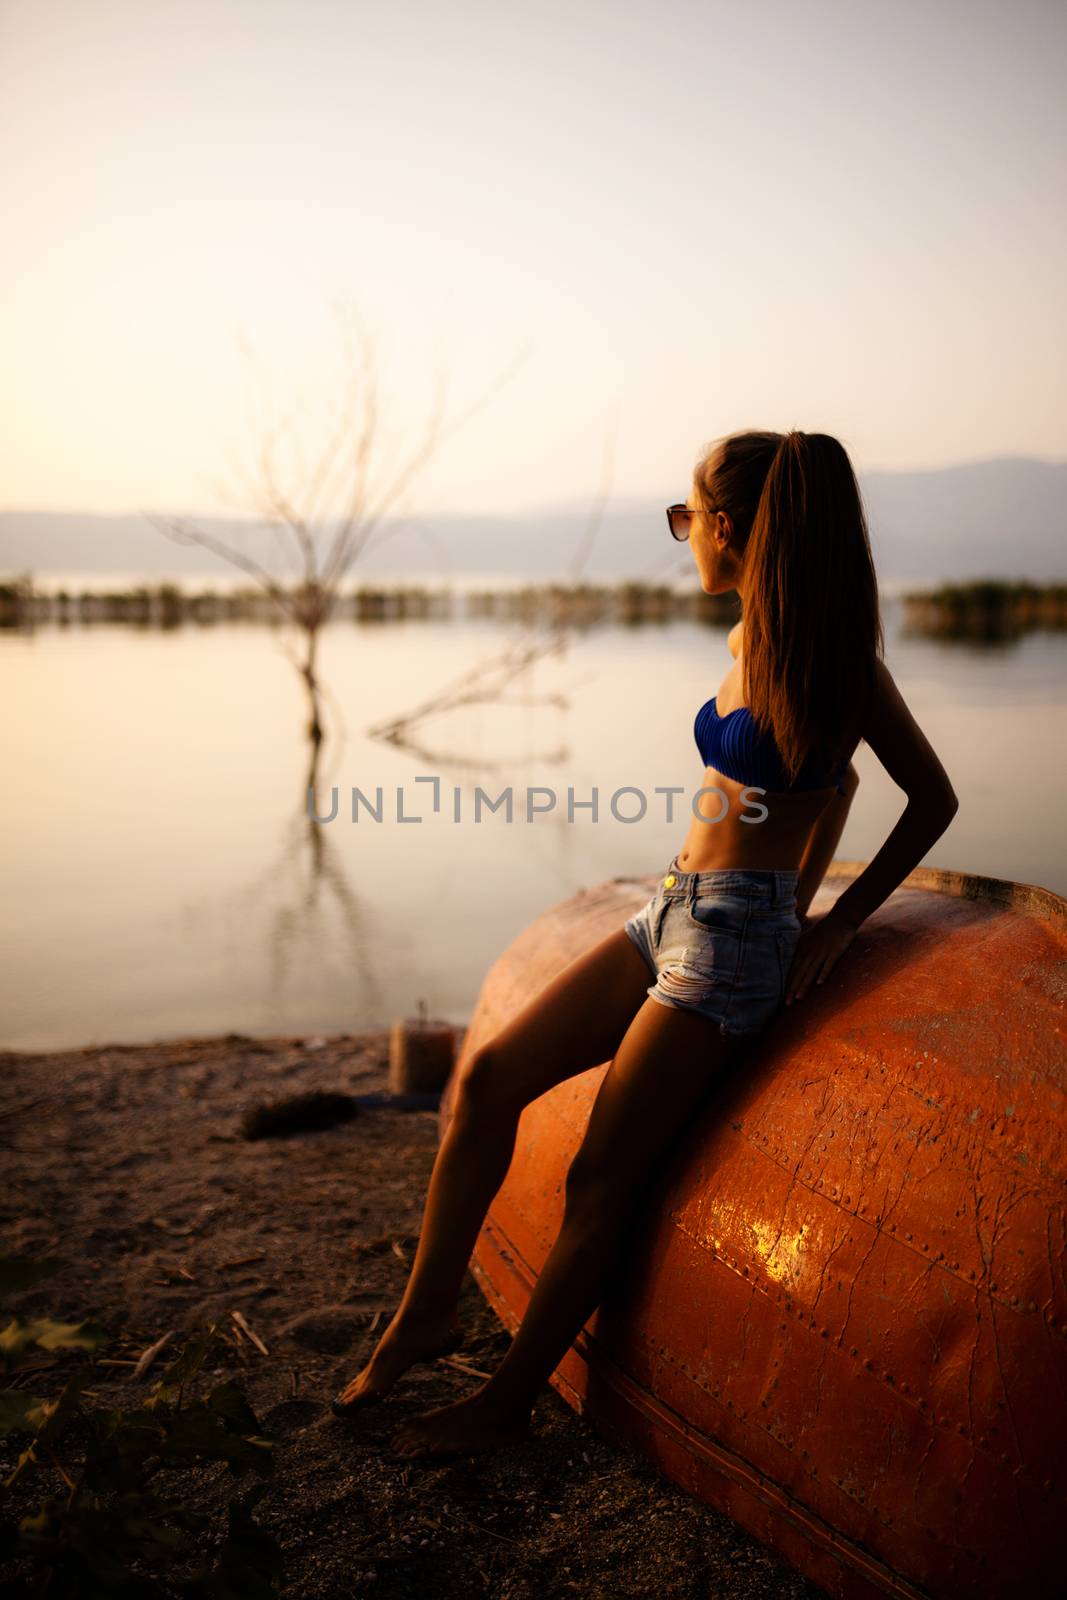 beautiful girl on a rowboat looking at sunset on a lake. half silhouette shot